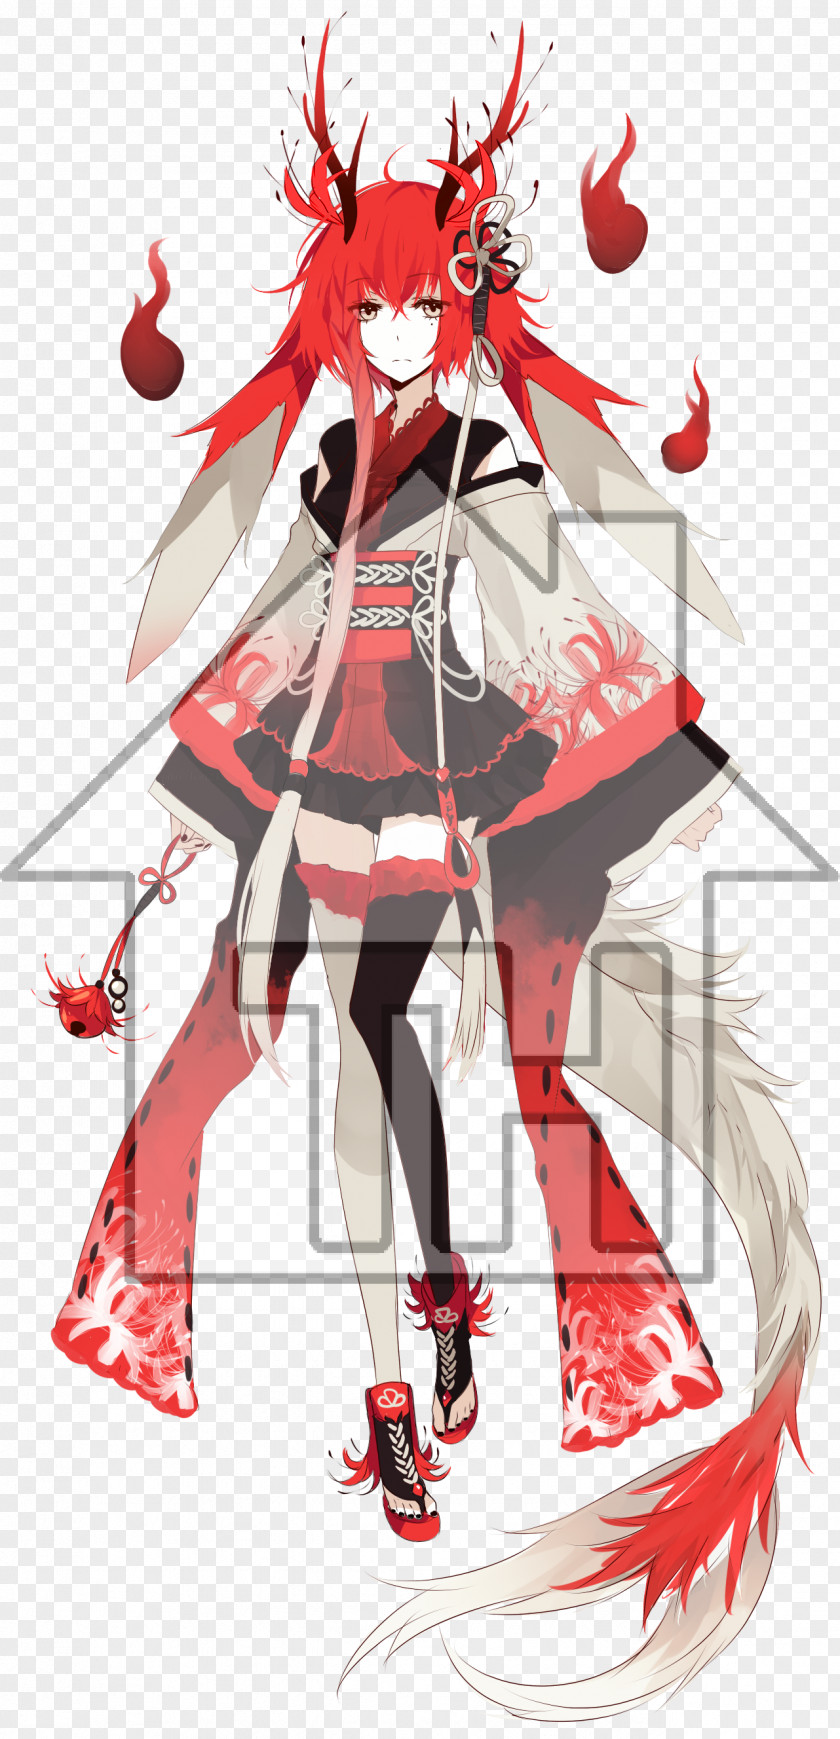 Spider Lily Costume Design Cartoon Character PNG